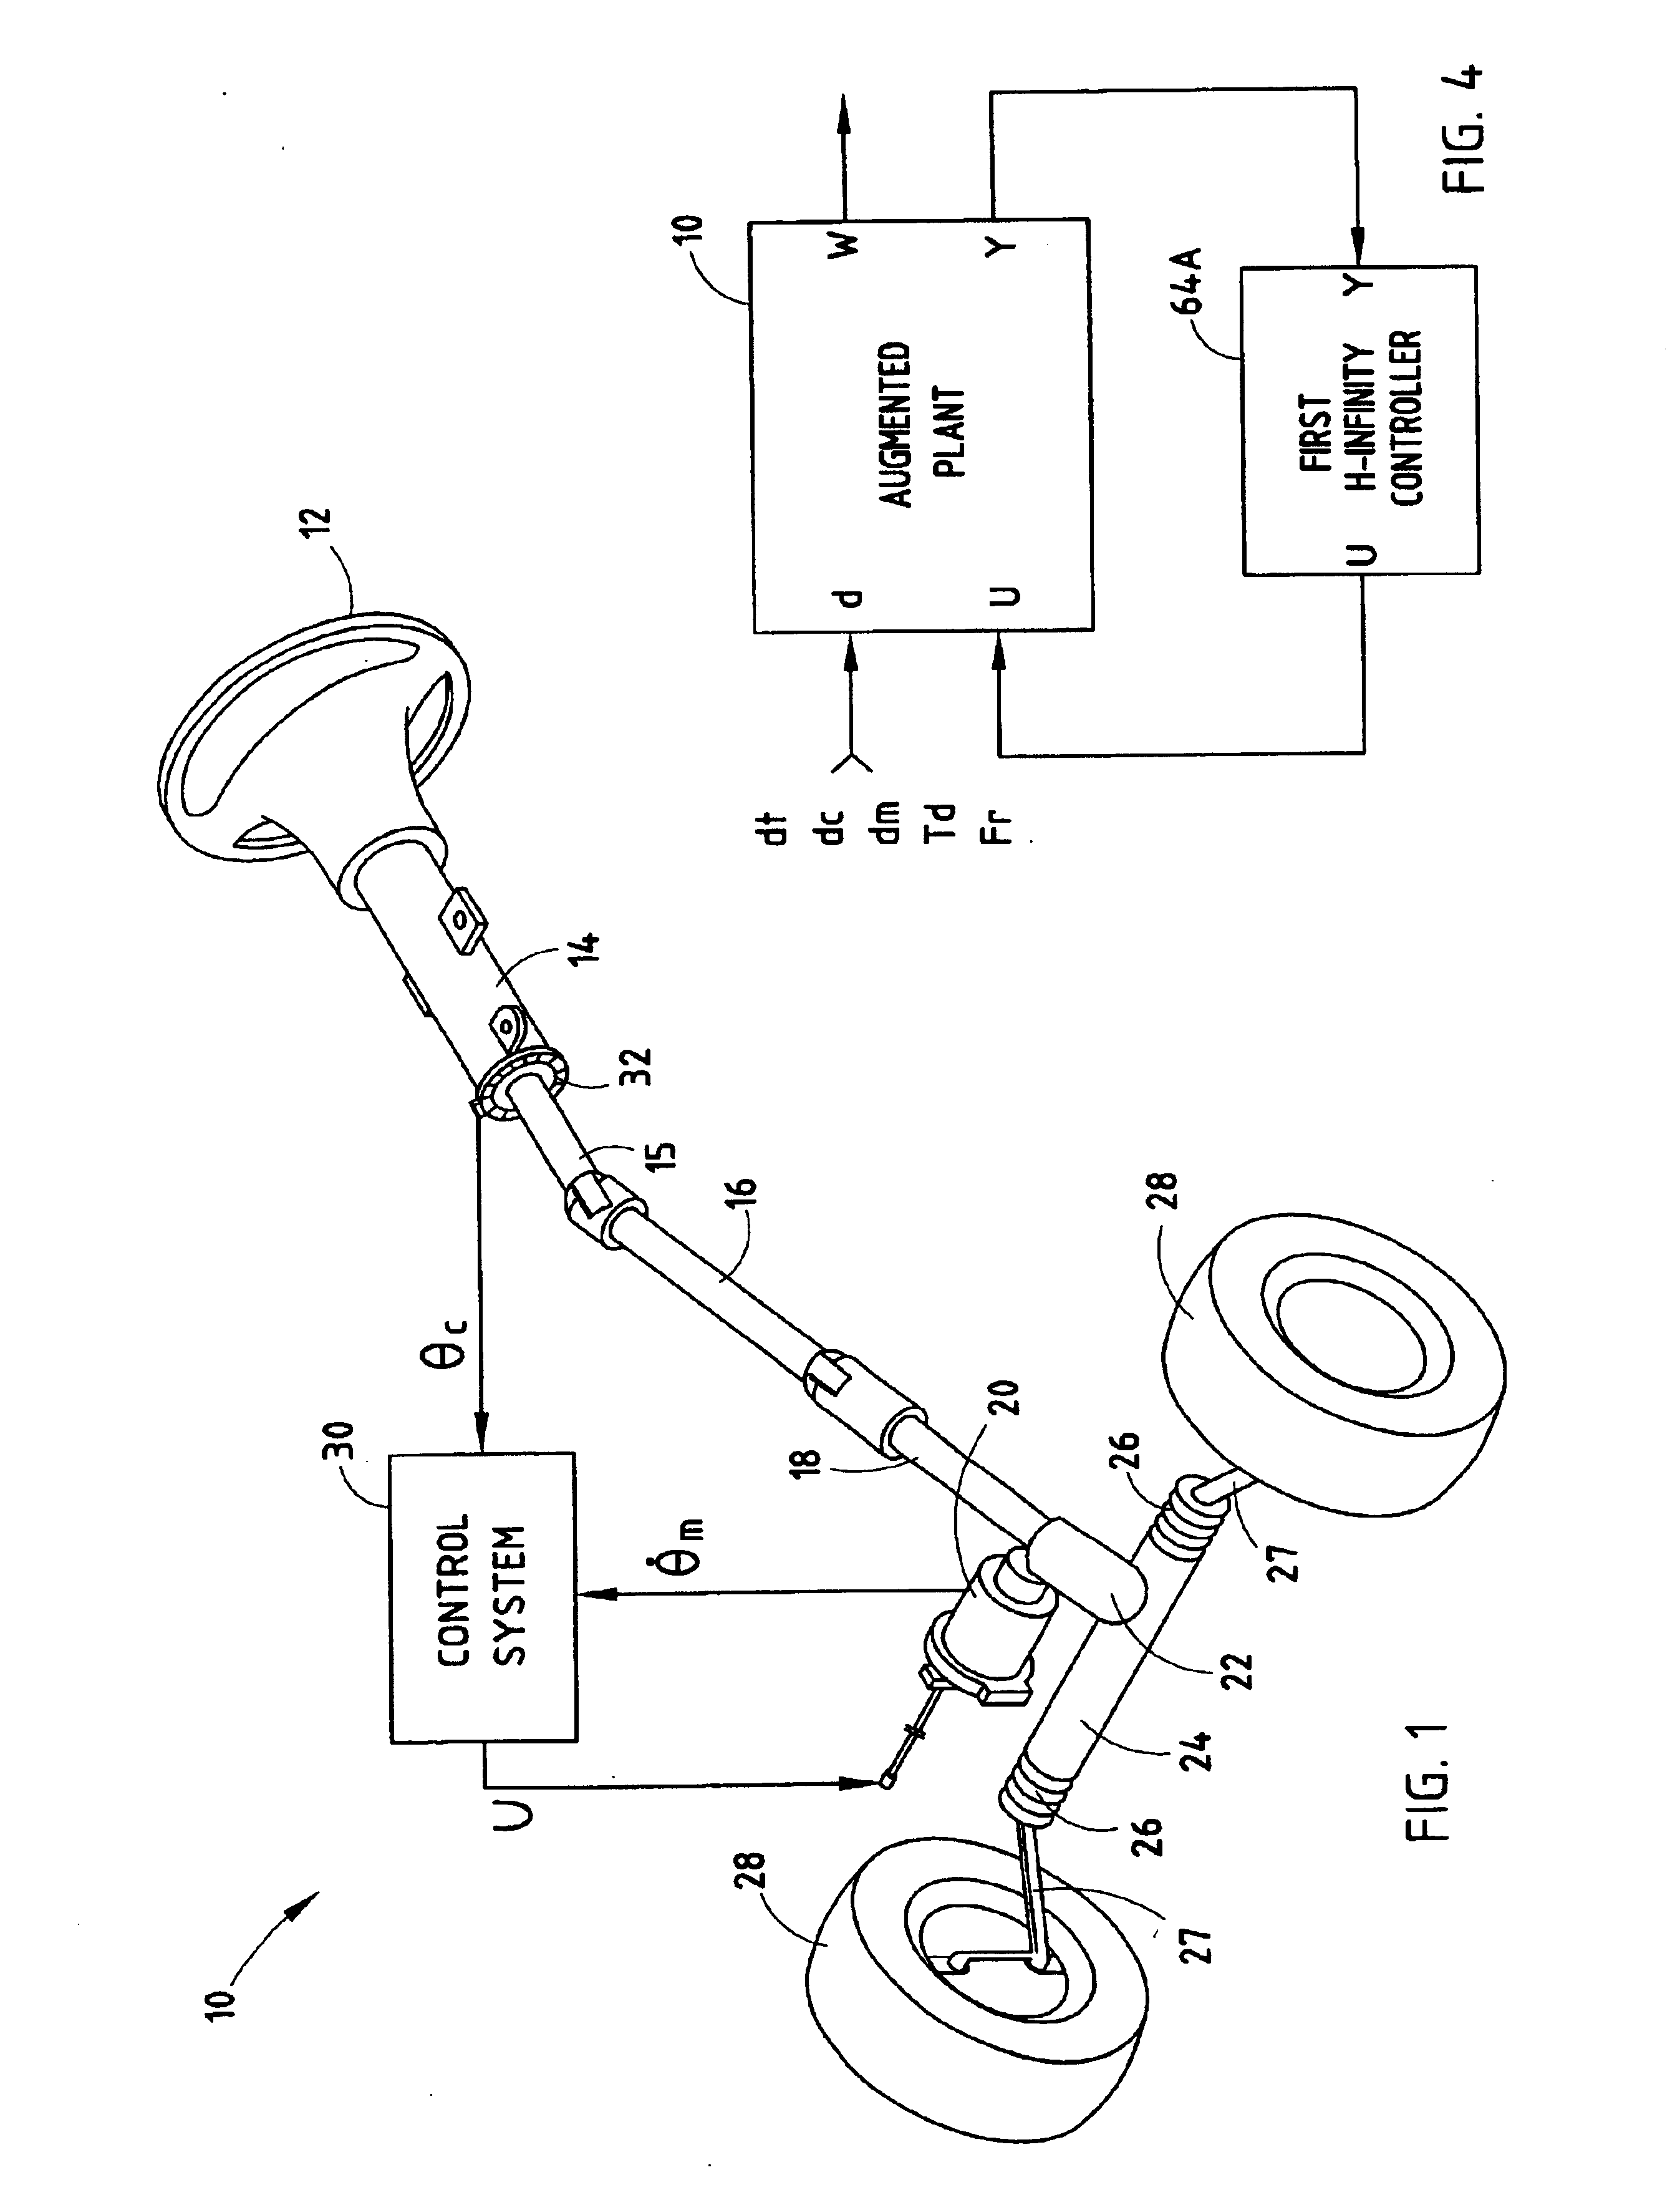 H-infinity control and gain scheduling method for electric power assist steering system